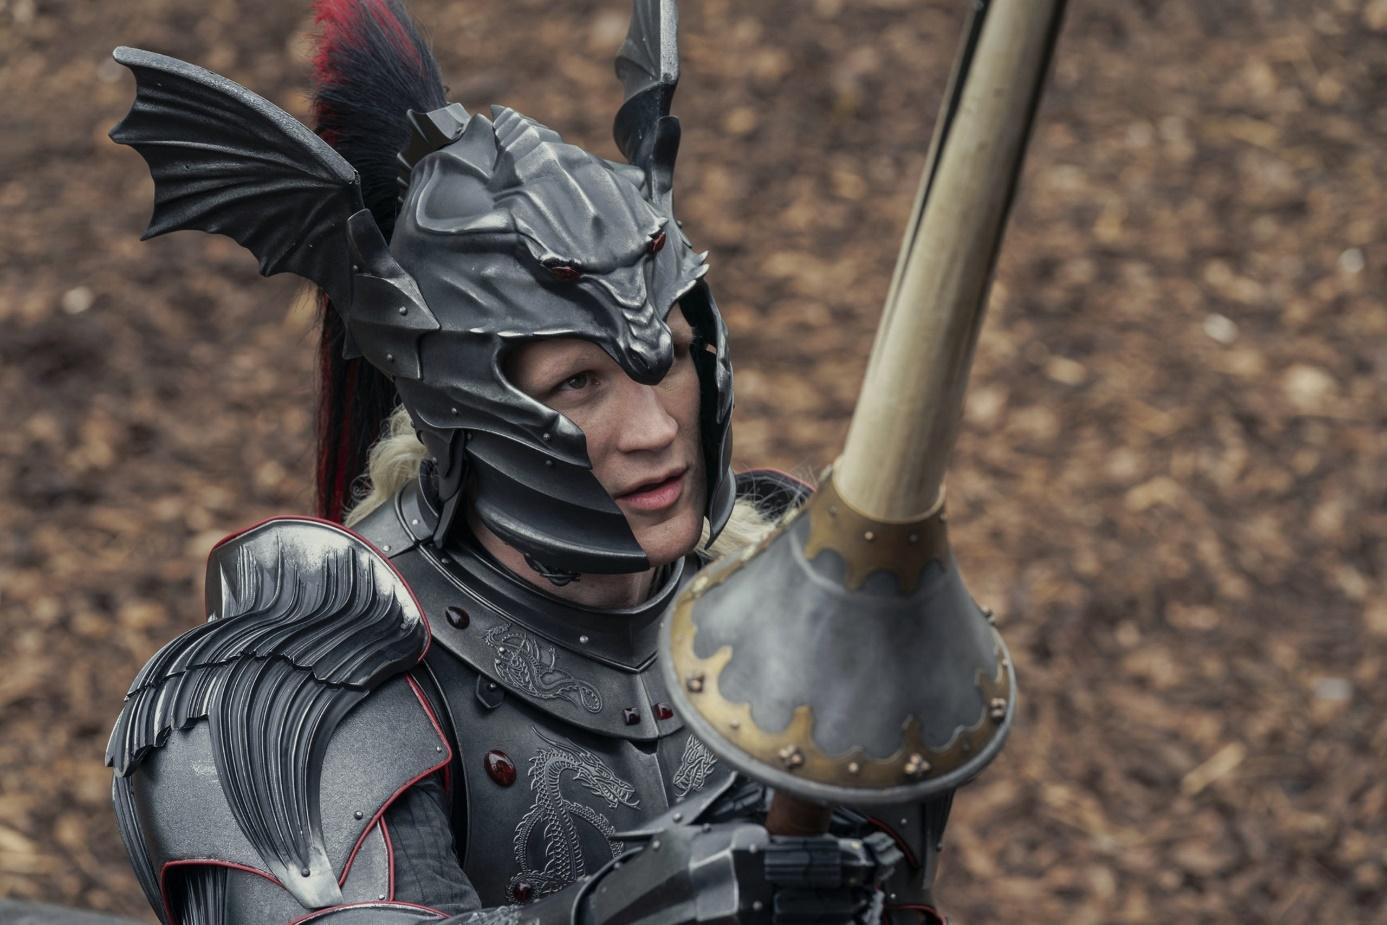 Prince Daemon Targaryen (Matt Smith), preparing to joust, is the king's troublesome younger brother in HBO's 'Game of Thrones' prequel series, 'House of the Dragon.'